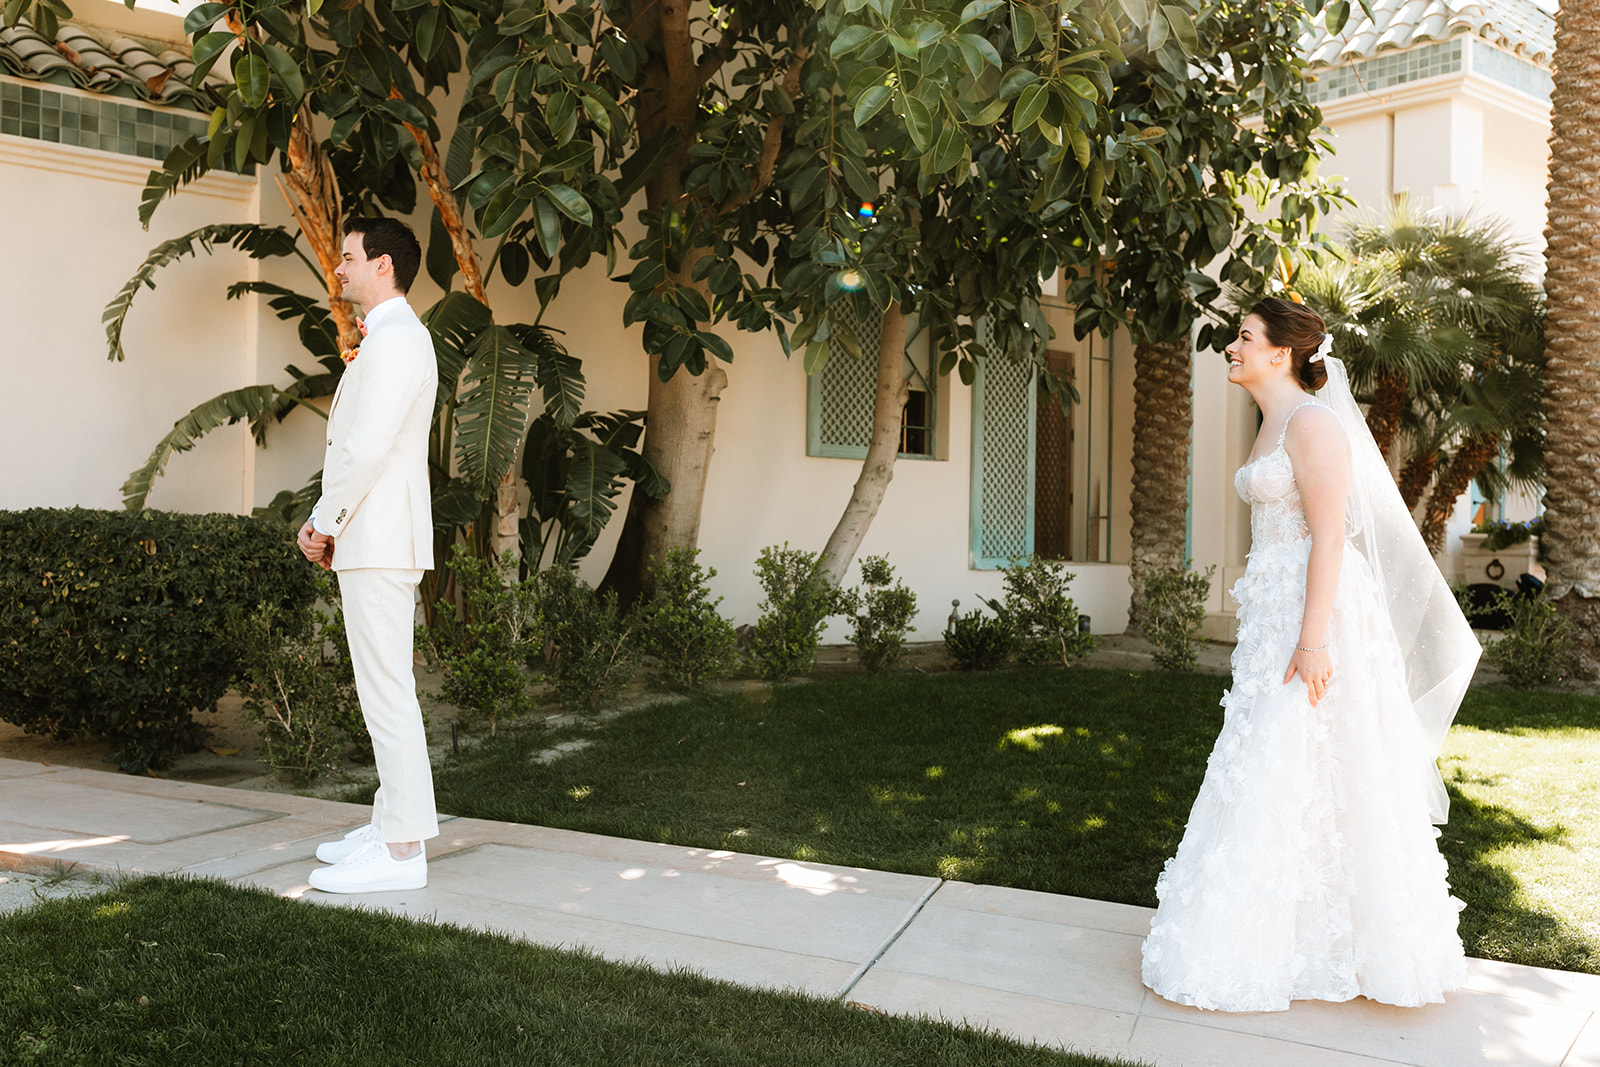 A wedding couple shares a first look together at their poolside palm springs wedding.